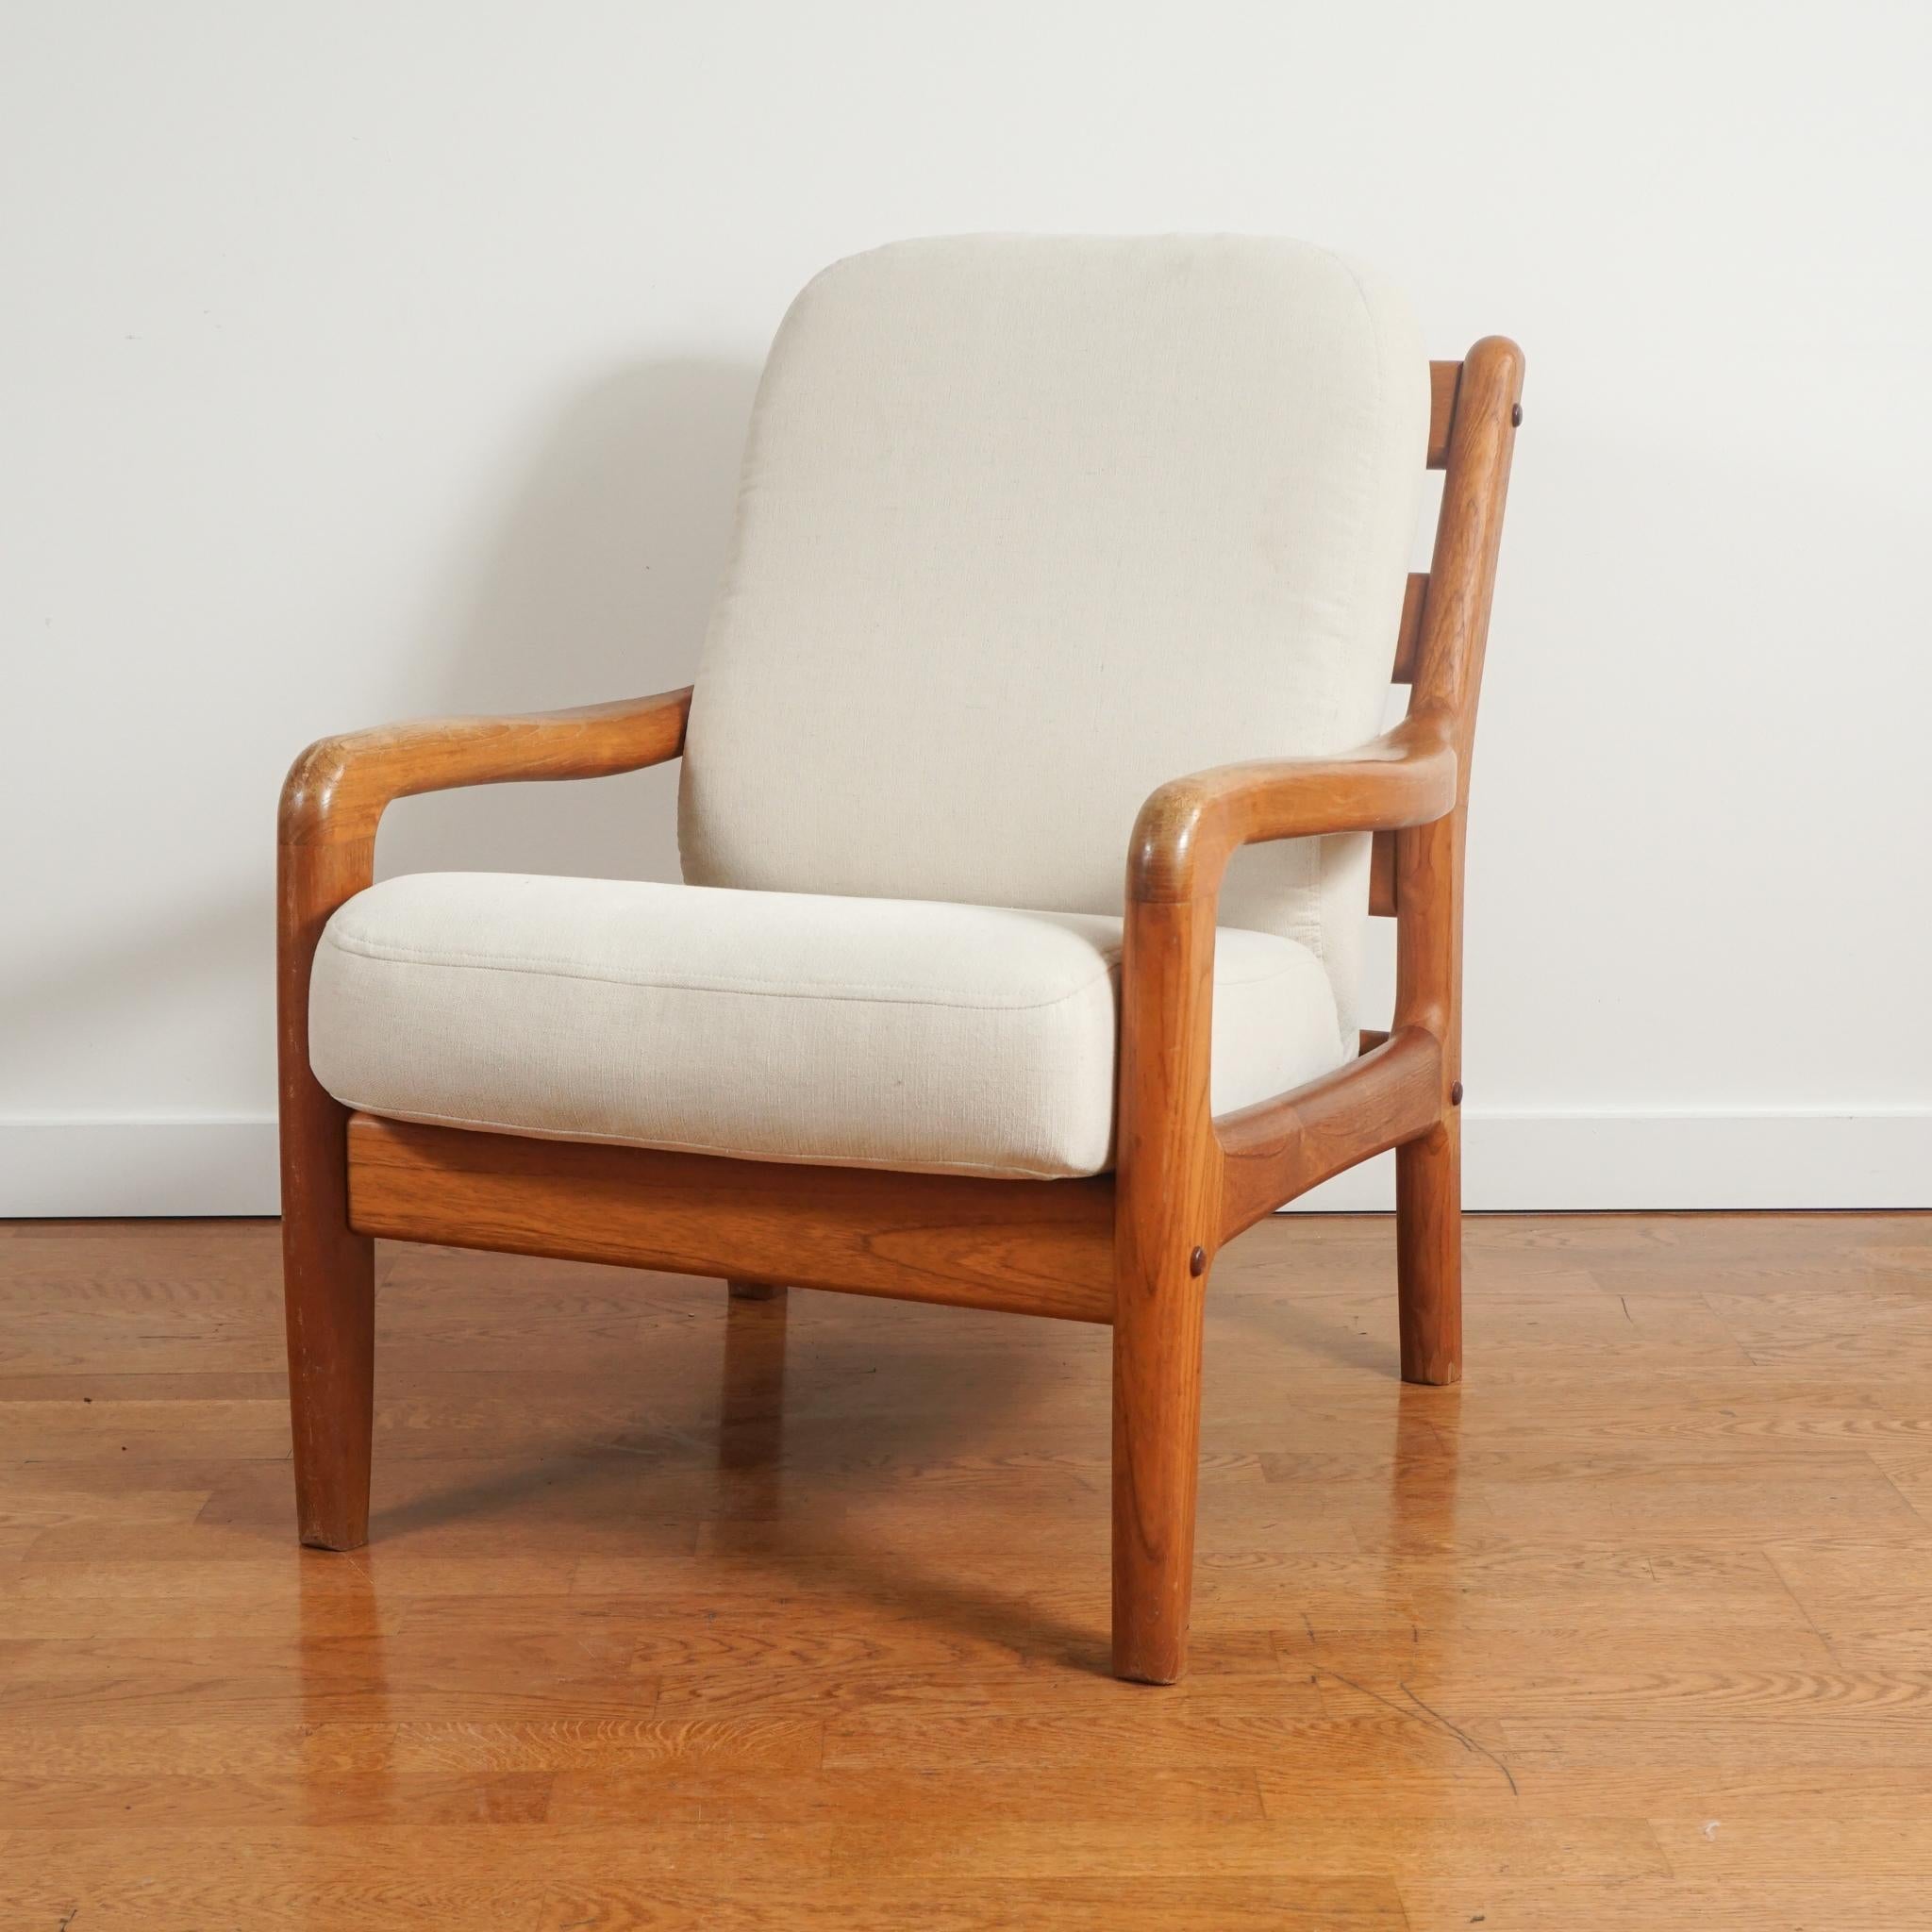 The pair of Danish modern arm chairs, shown here, were made in the 1960s.  The solidly built chairs retain their original wood finish and show only slight wear.  The seat and back cushions are beautifully tailored in a cream colored woven upholstery